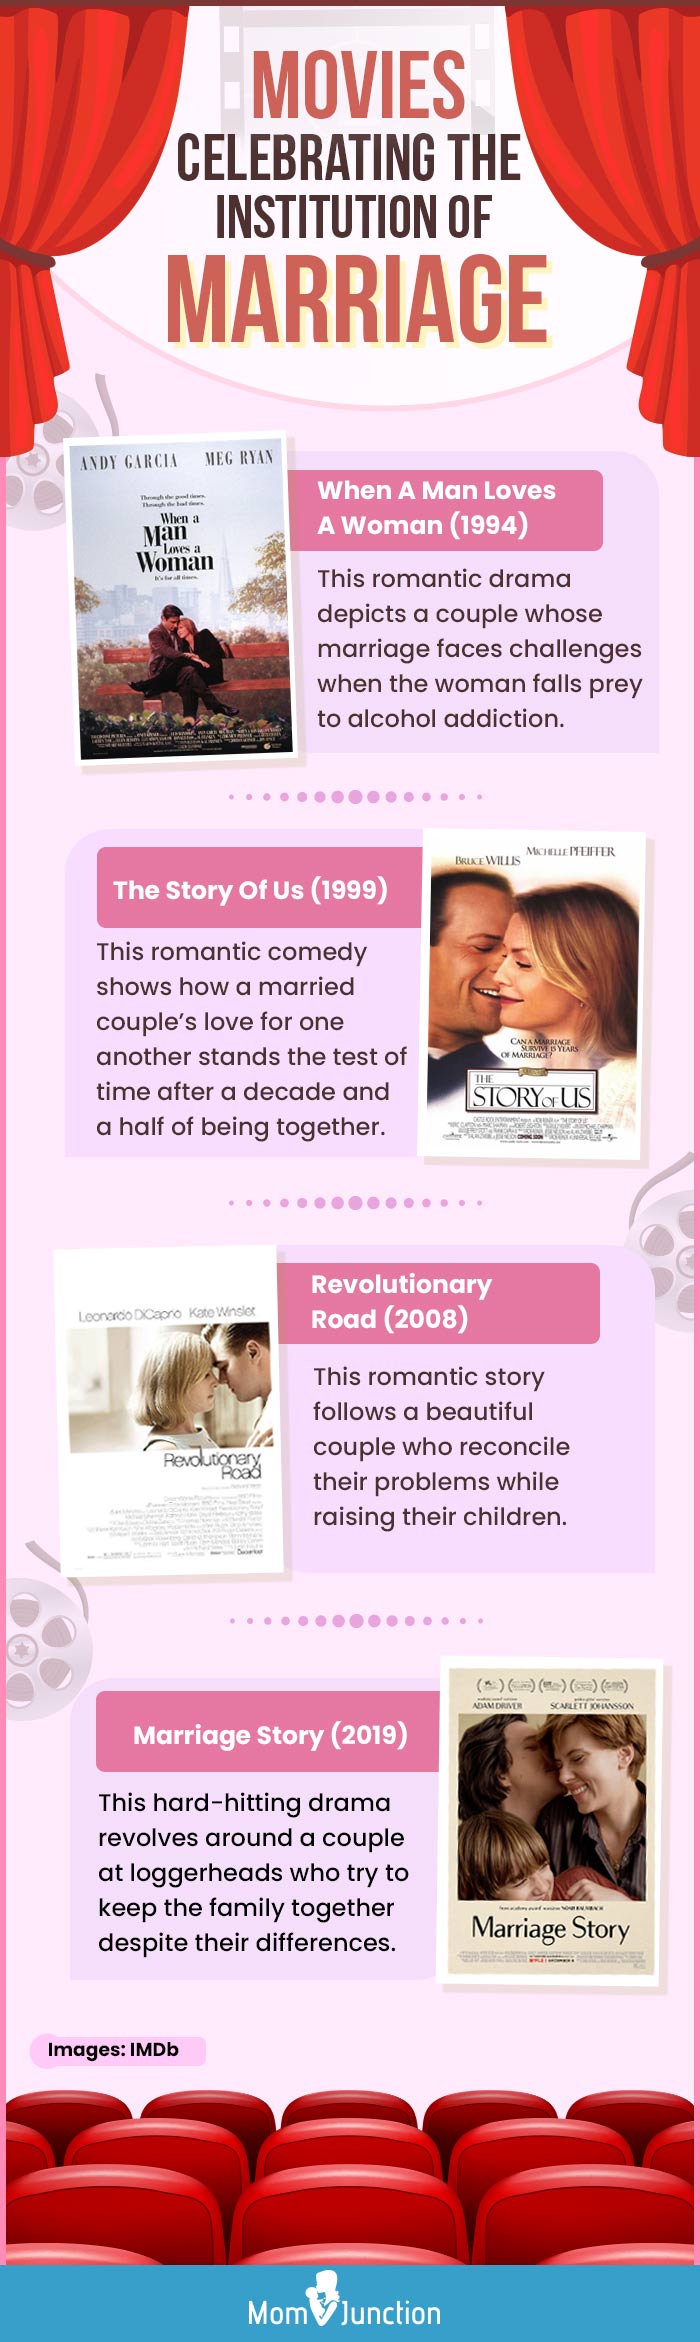 movies celebrating the institution of marriage (infographic)